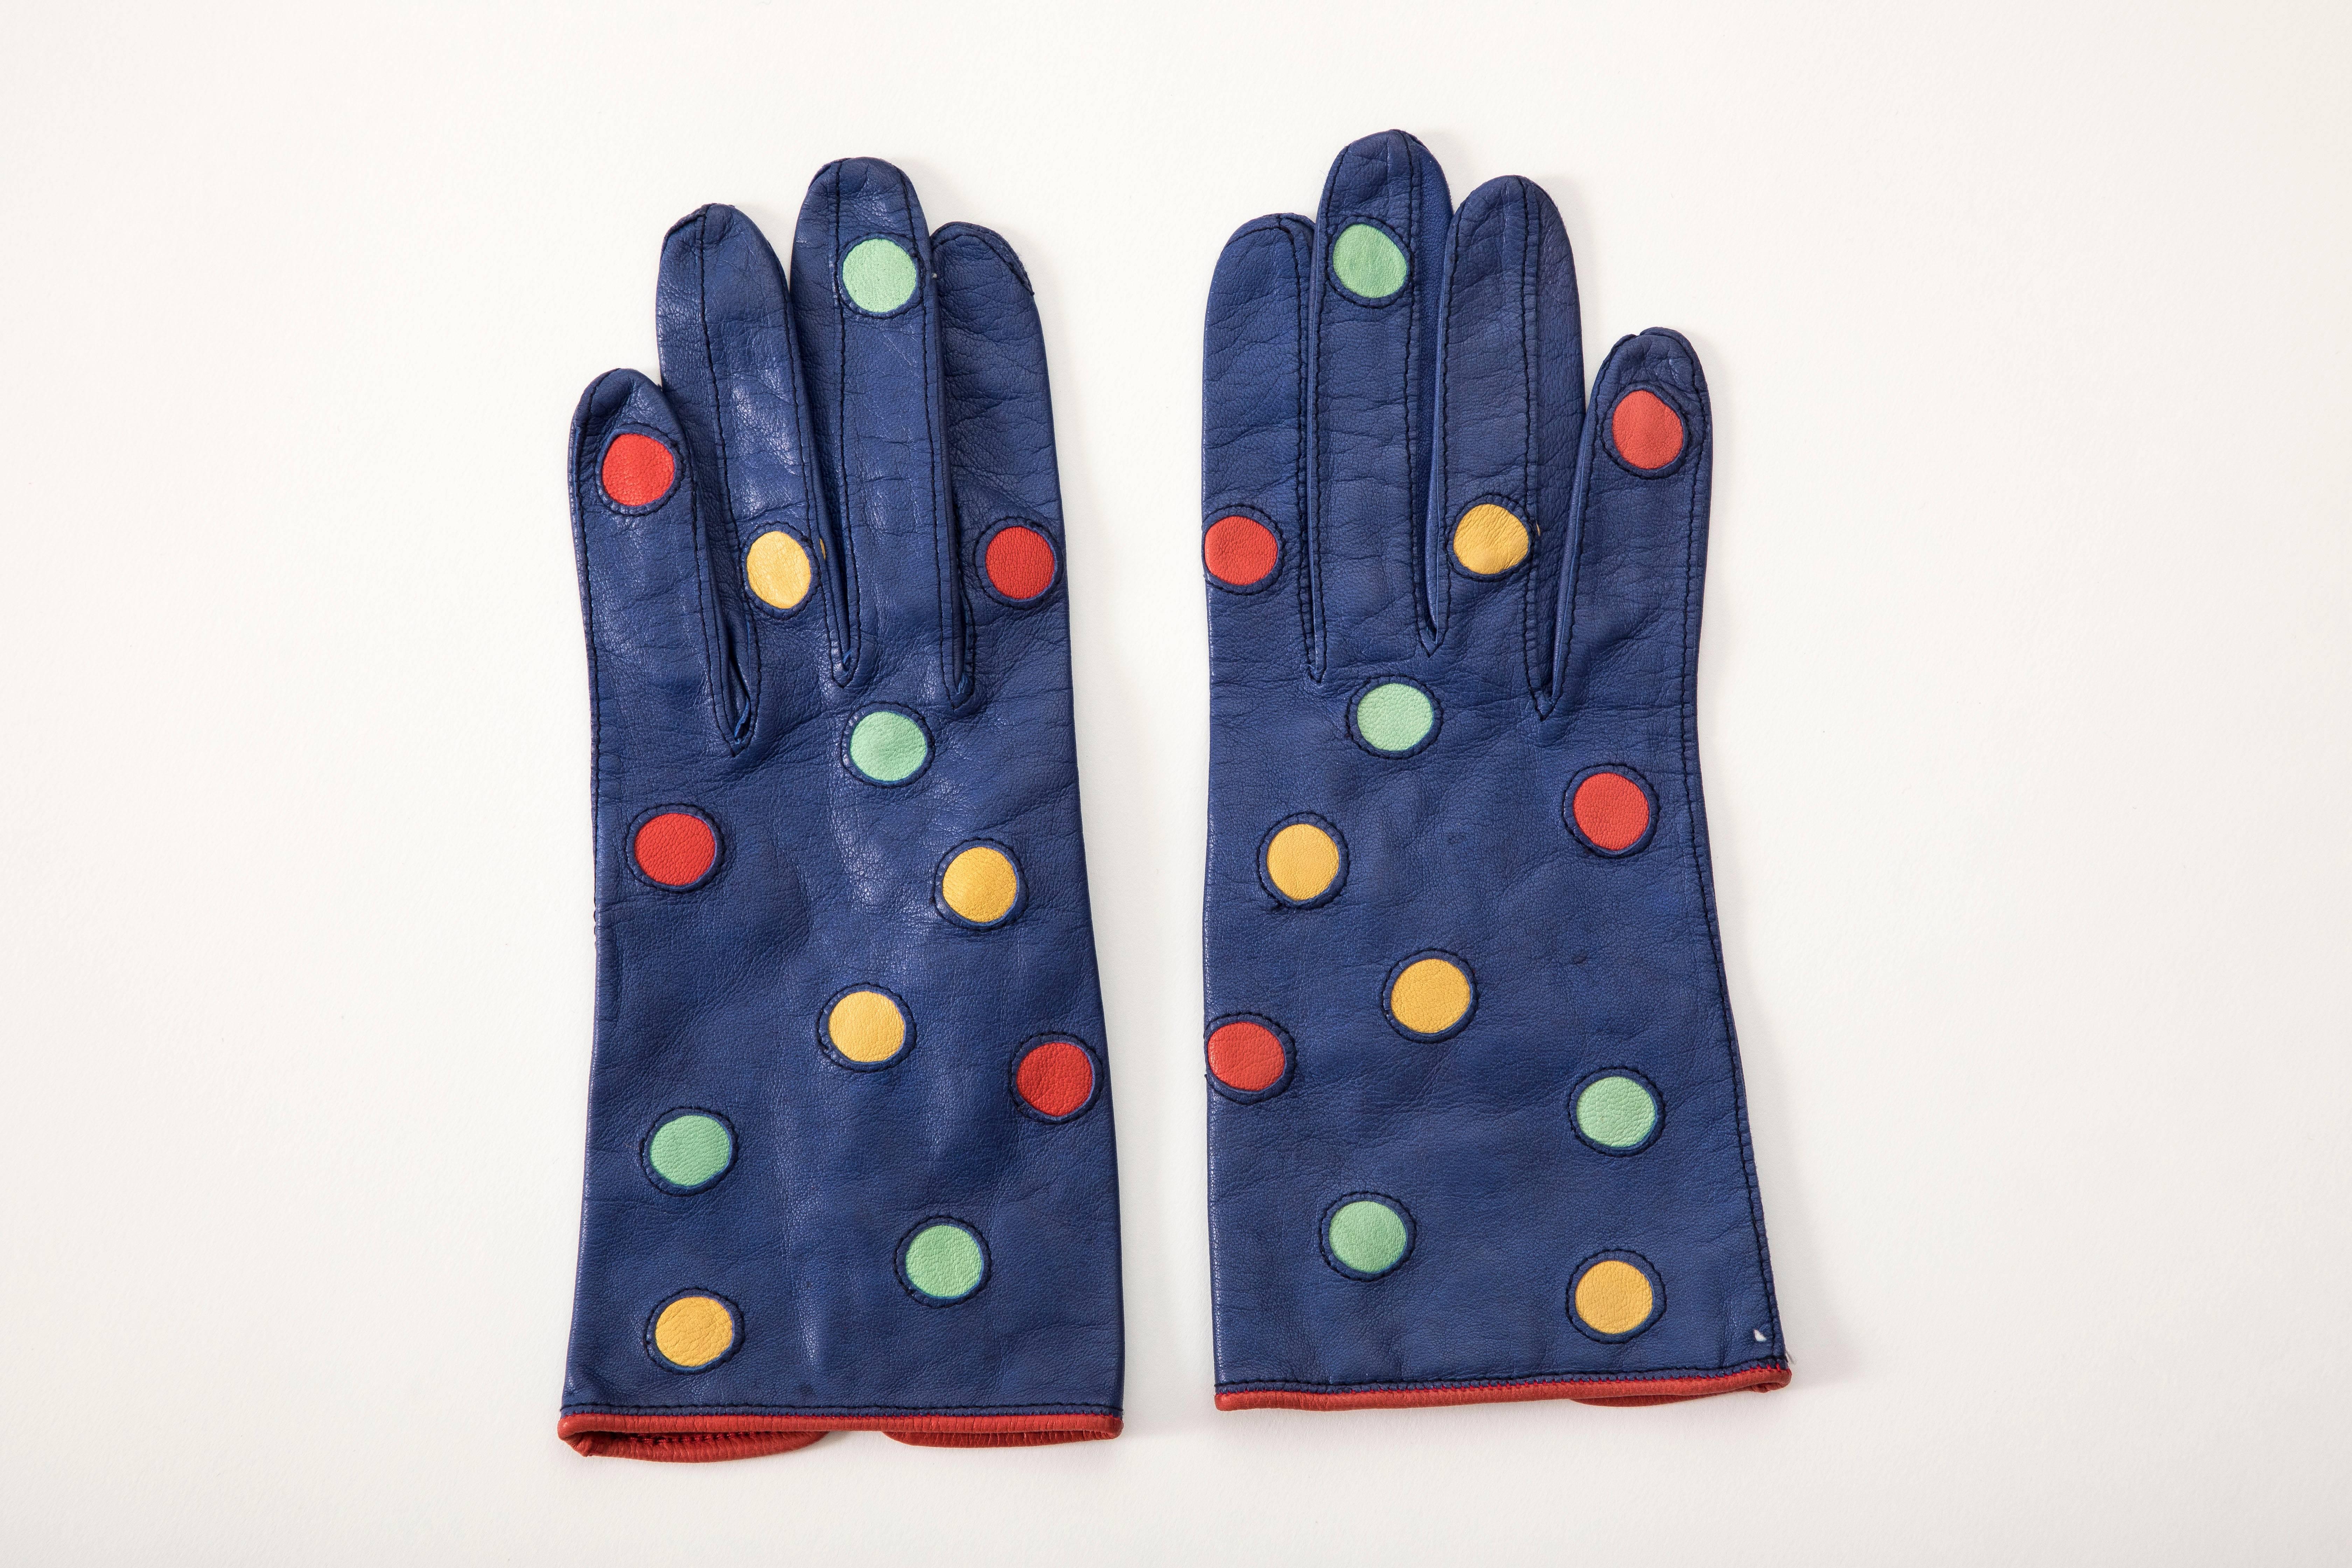 Escada Margaretha Ley, circa 1980's leather gloves with polka dot pattern at front and contrast stitching throughout.

No Size Label
Length: 8, Width 3.25
